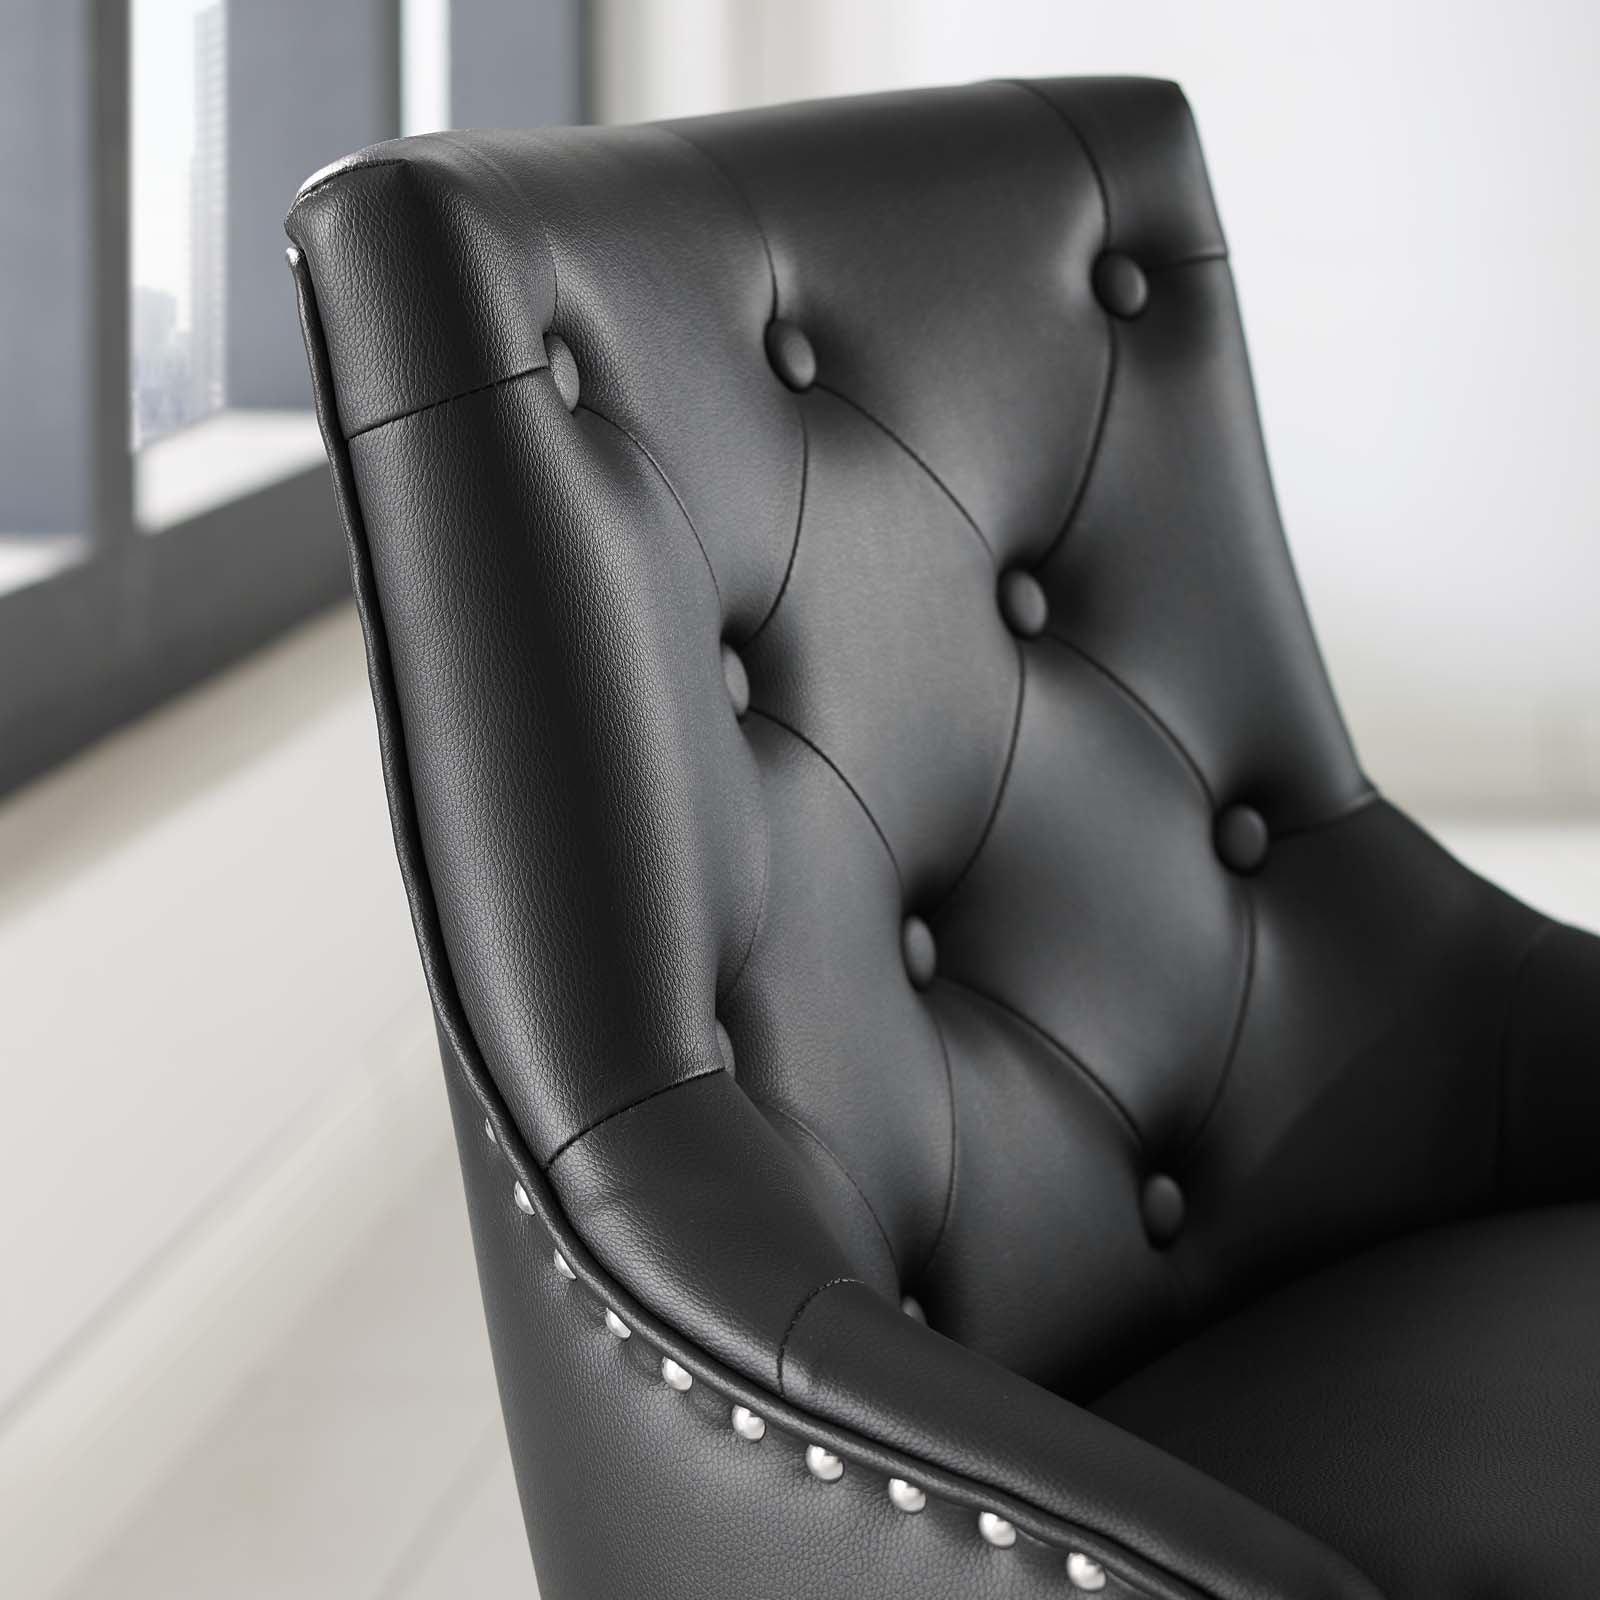 Modway Task Chairs - Regent Tufted Button Swivel Faux Leather Office Chair Black